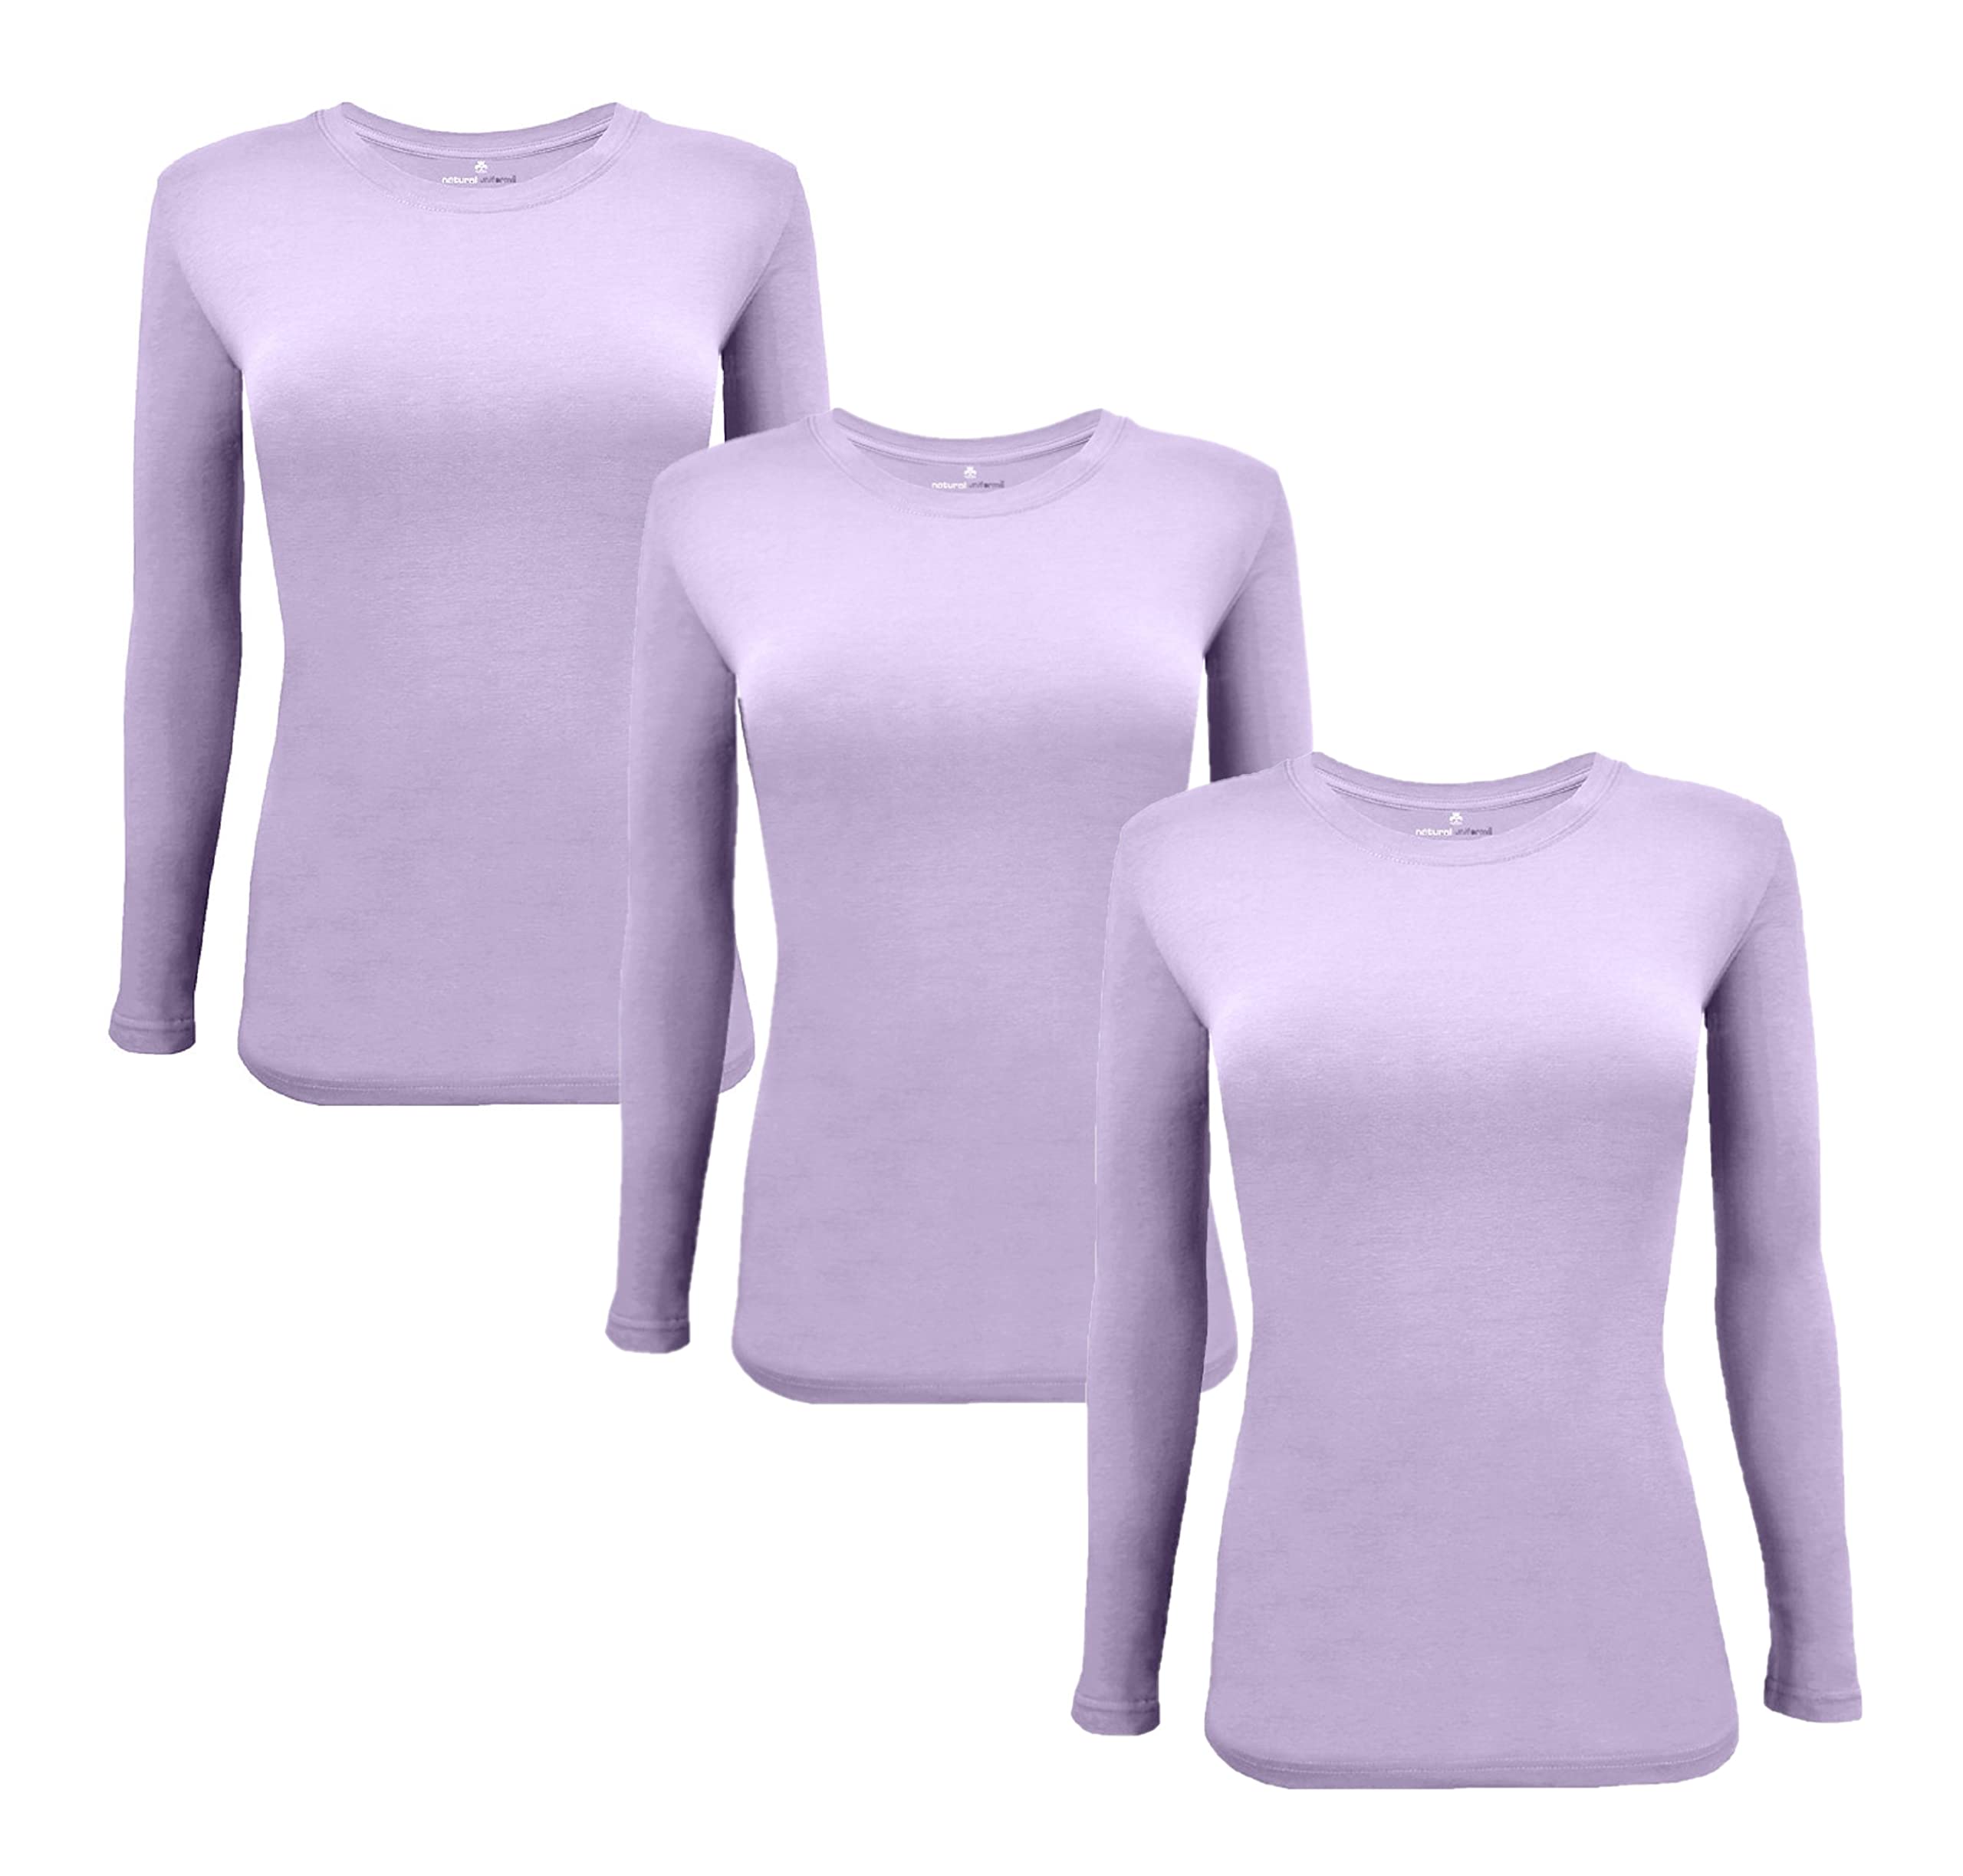 Natural Uniforms Womens Under Scrub Tee crew Neck Long Sleeve T-Shirt-3-Pack (X-Small, 3 Pack-Lavender)